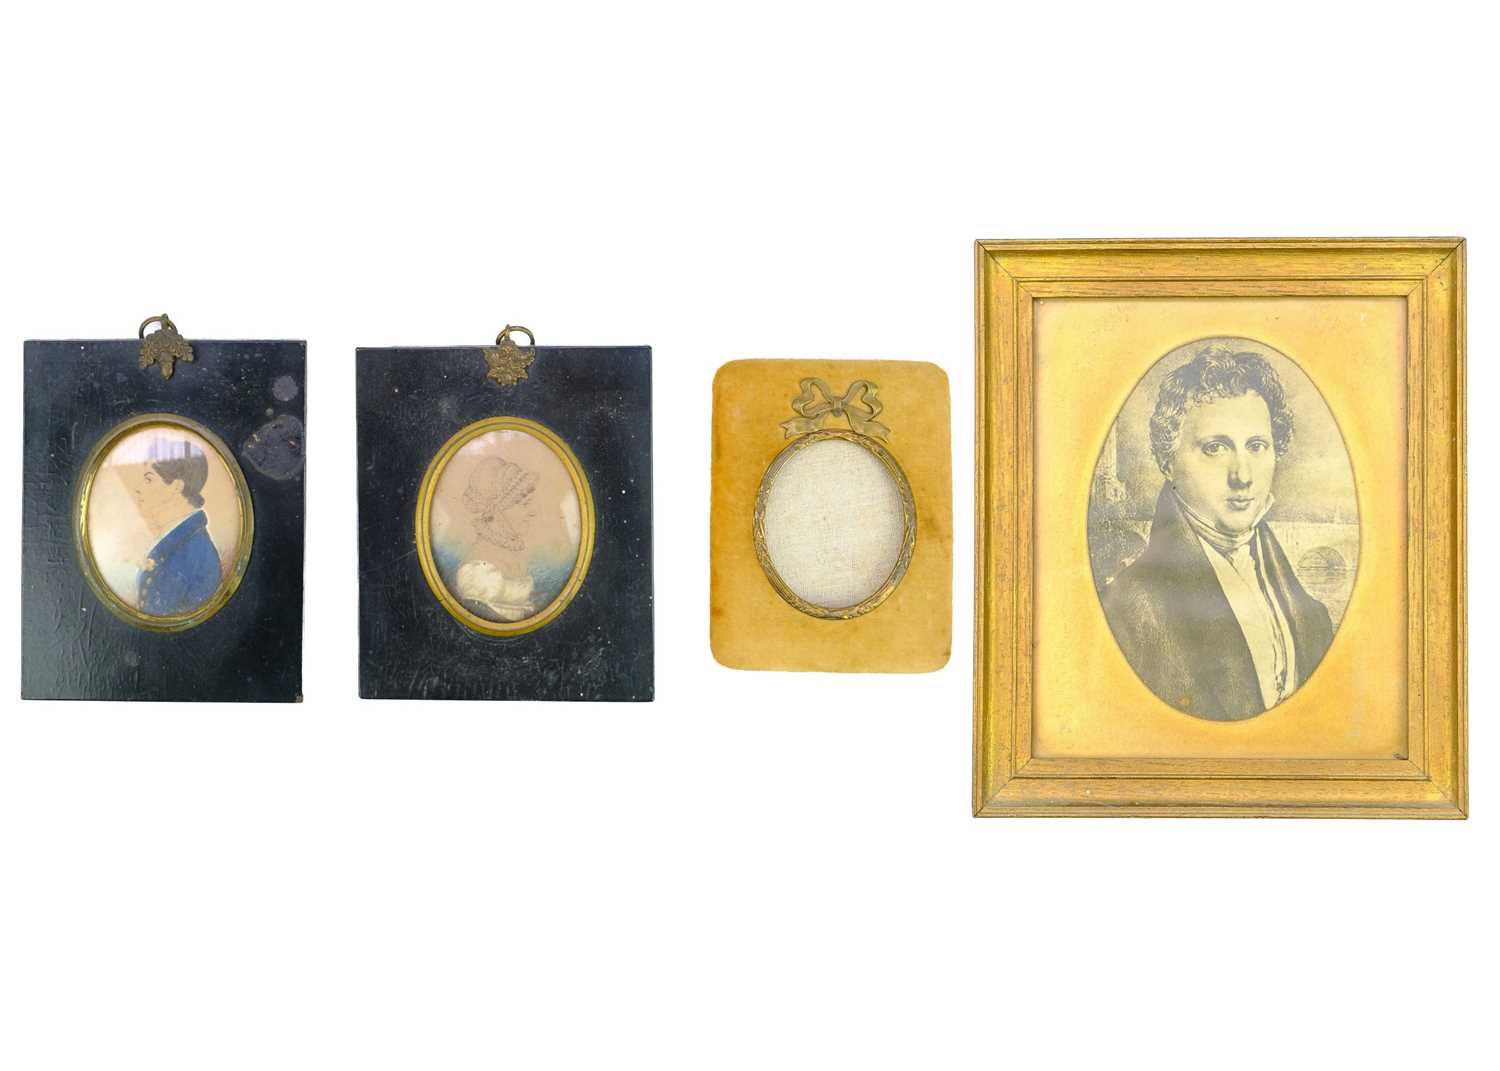 Two early 19th century portrait miniatures in watercolour.